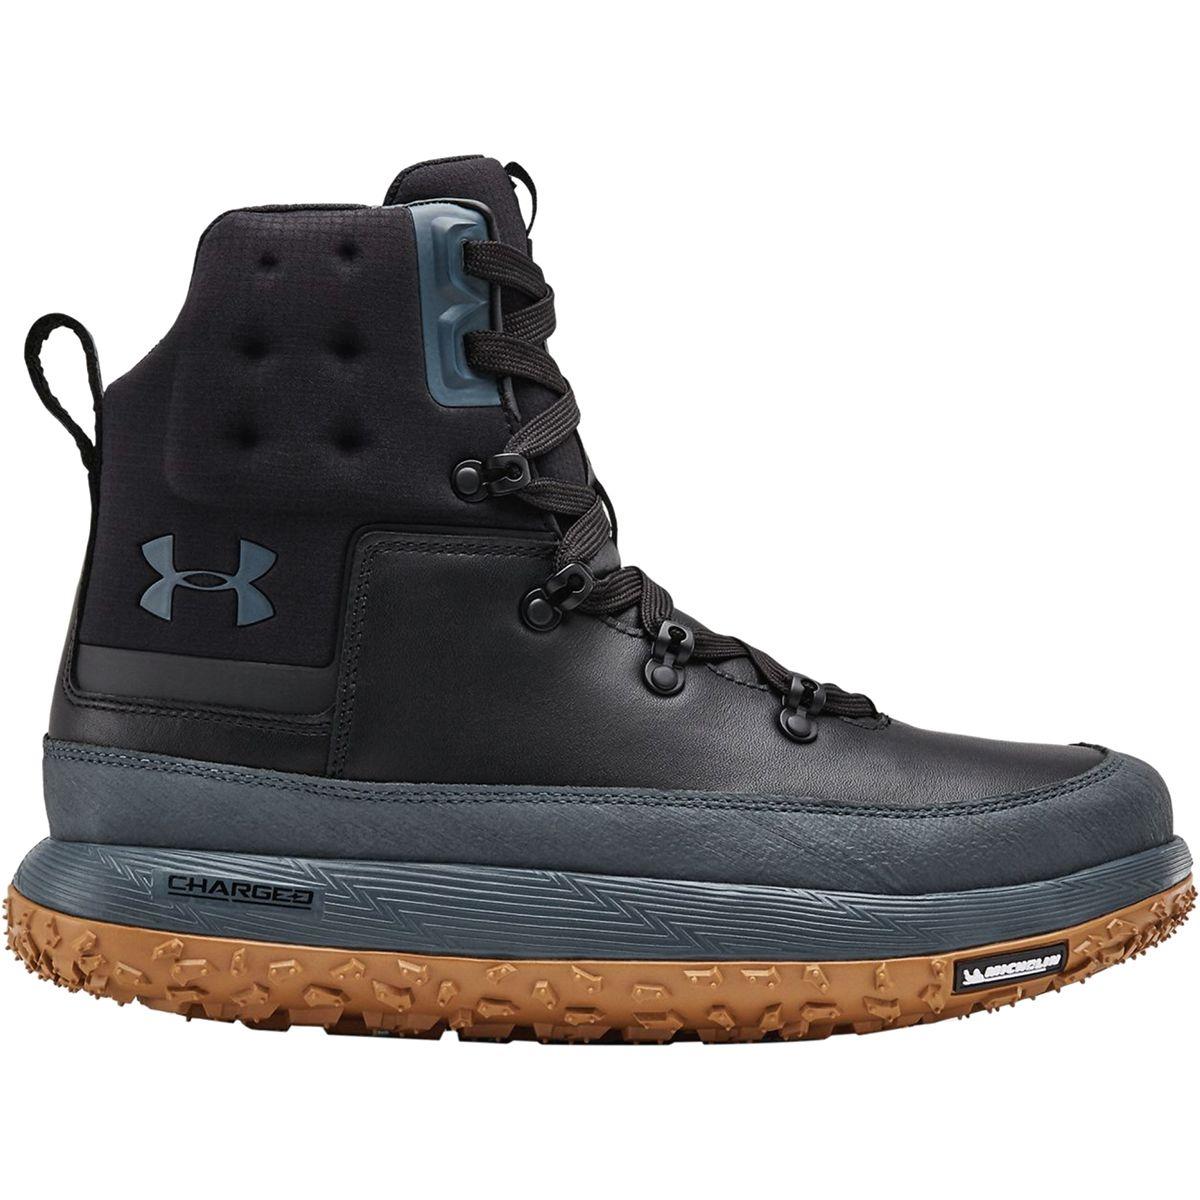 Under Armour Rubber Fat Tire Govie Boot in Black for Men - Lyst